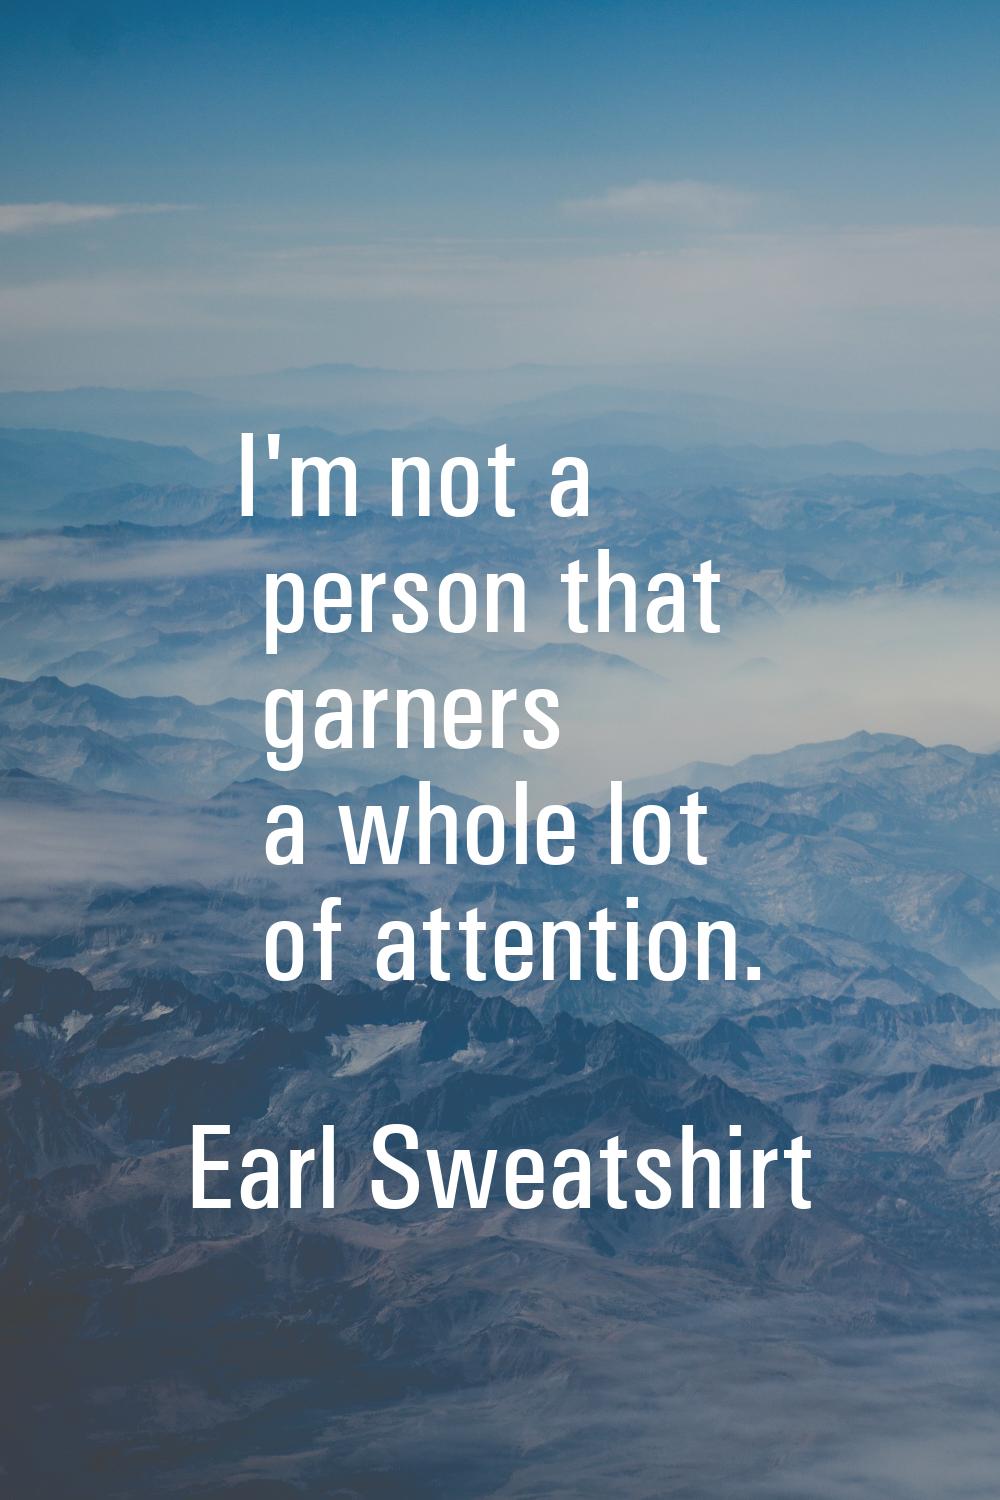 I'm not a person that garners a whole lot of attention.